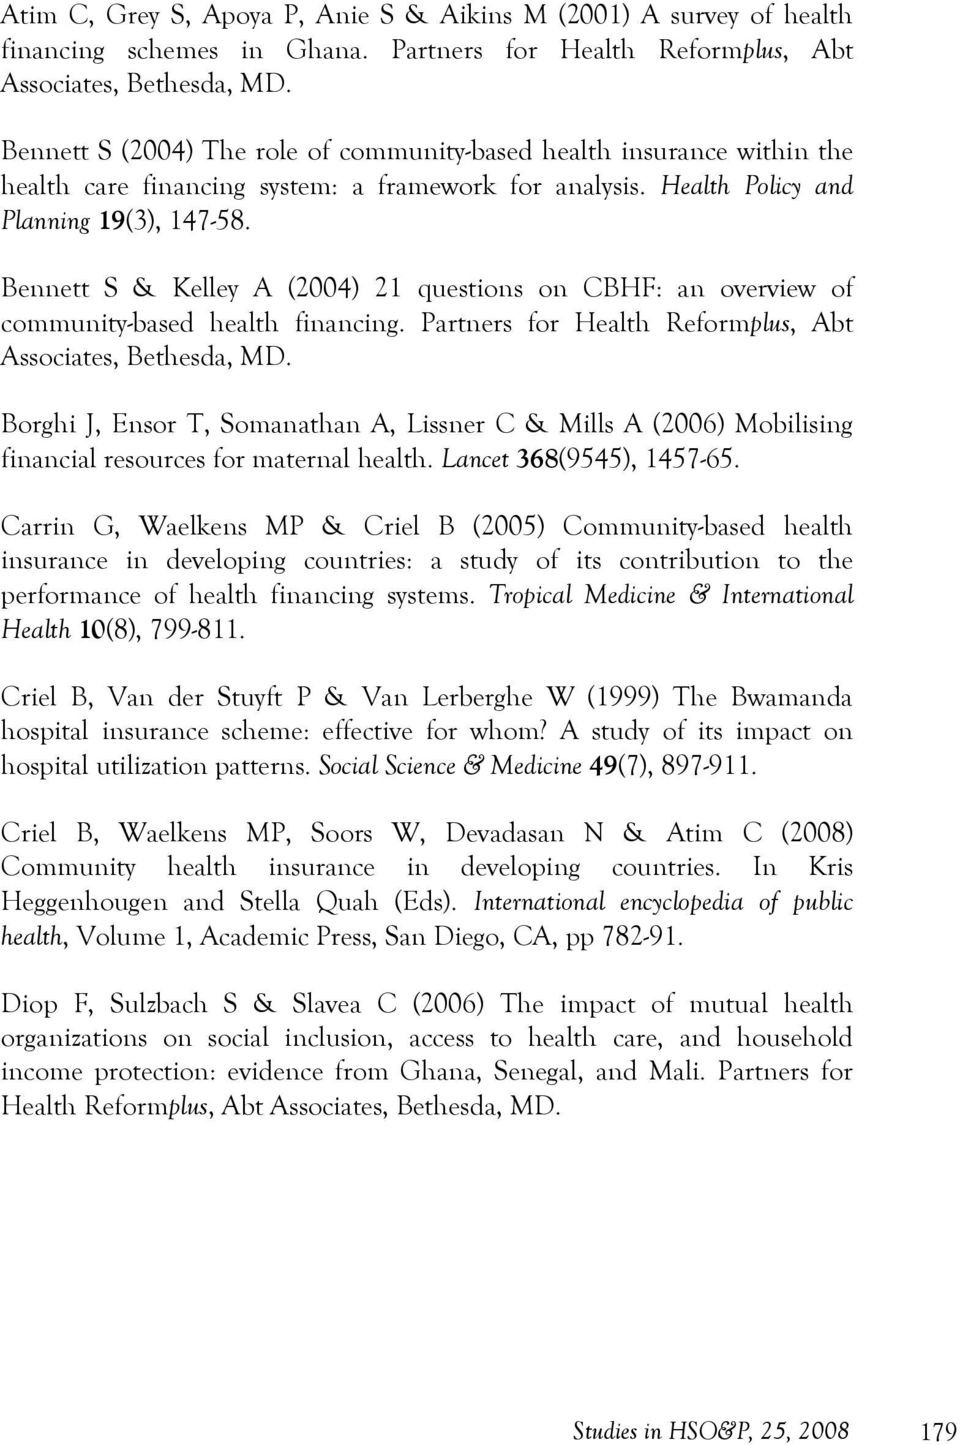 Bennett S & Kelley A (2004) 21 questions on CBHF: an overview of community-based health financing. Partners for Health Reformplus, Abt Associates, Bethesda, MD.